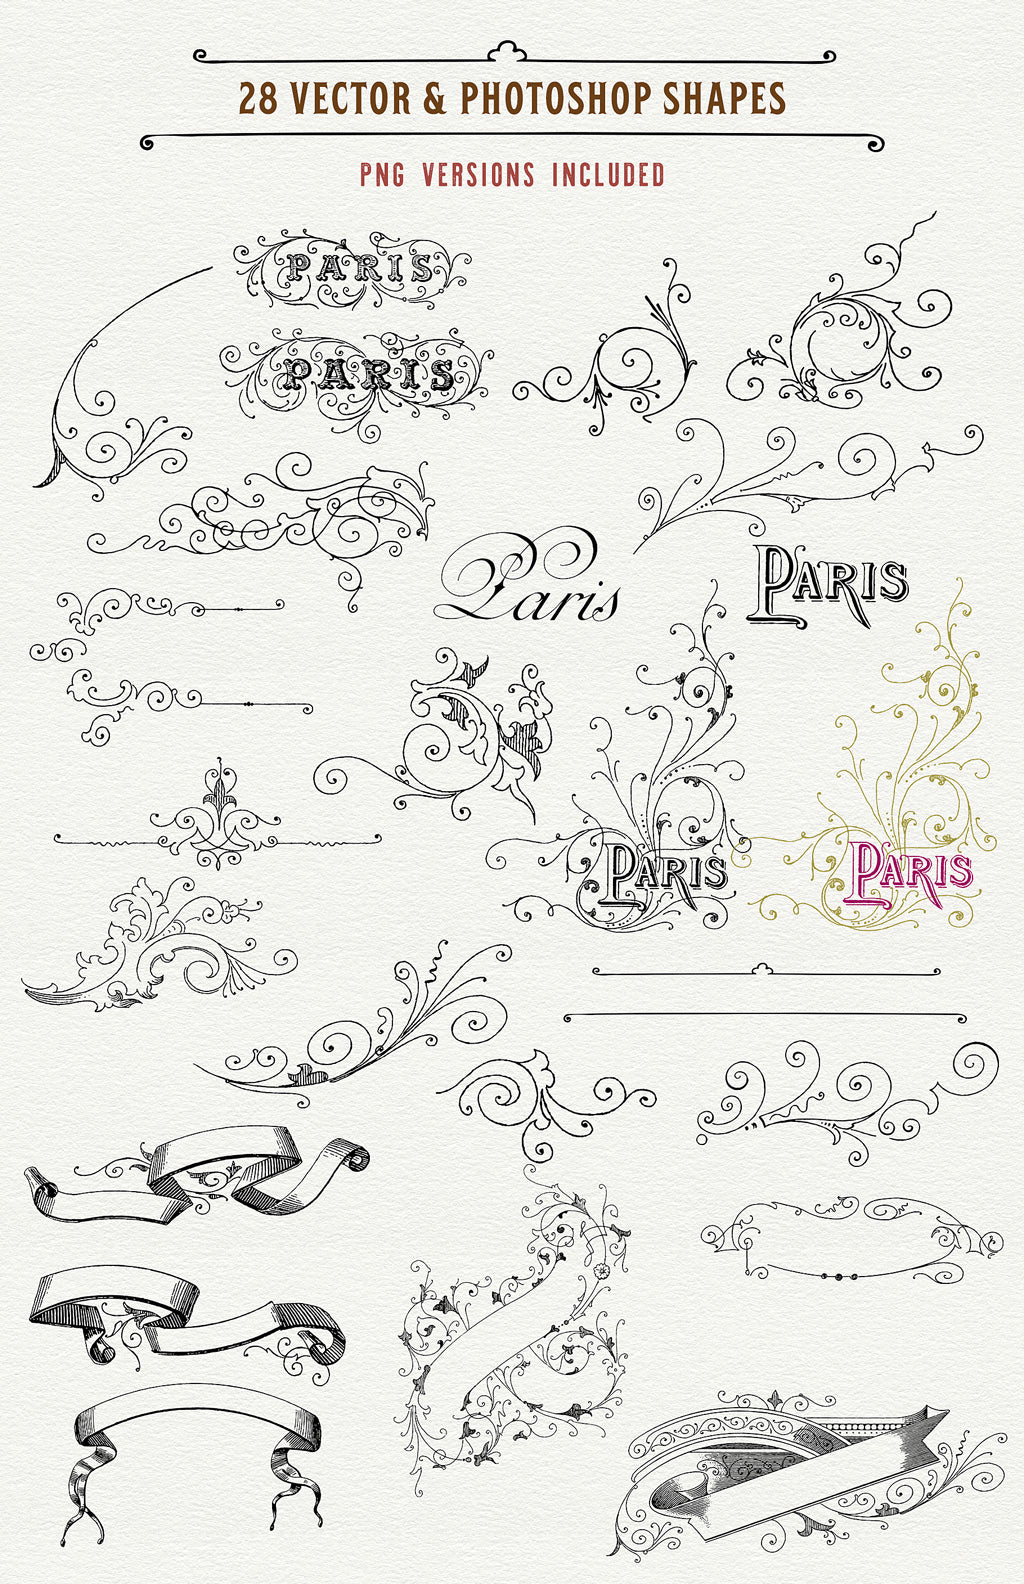 There are 28 of the vintage French graphics that are also provided as vector and Photoshop Custom Shapes.